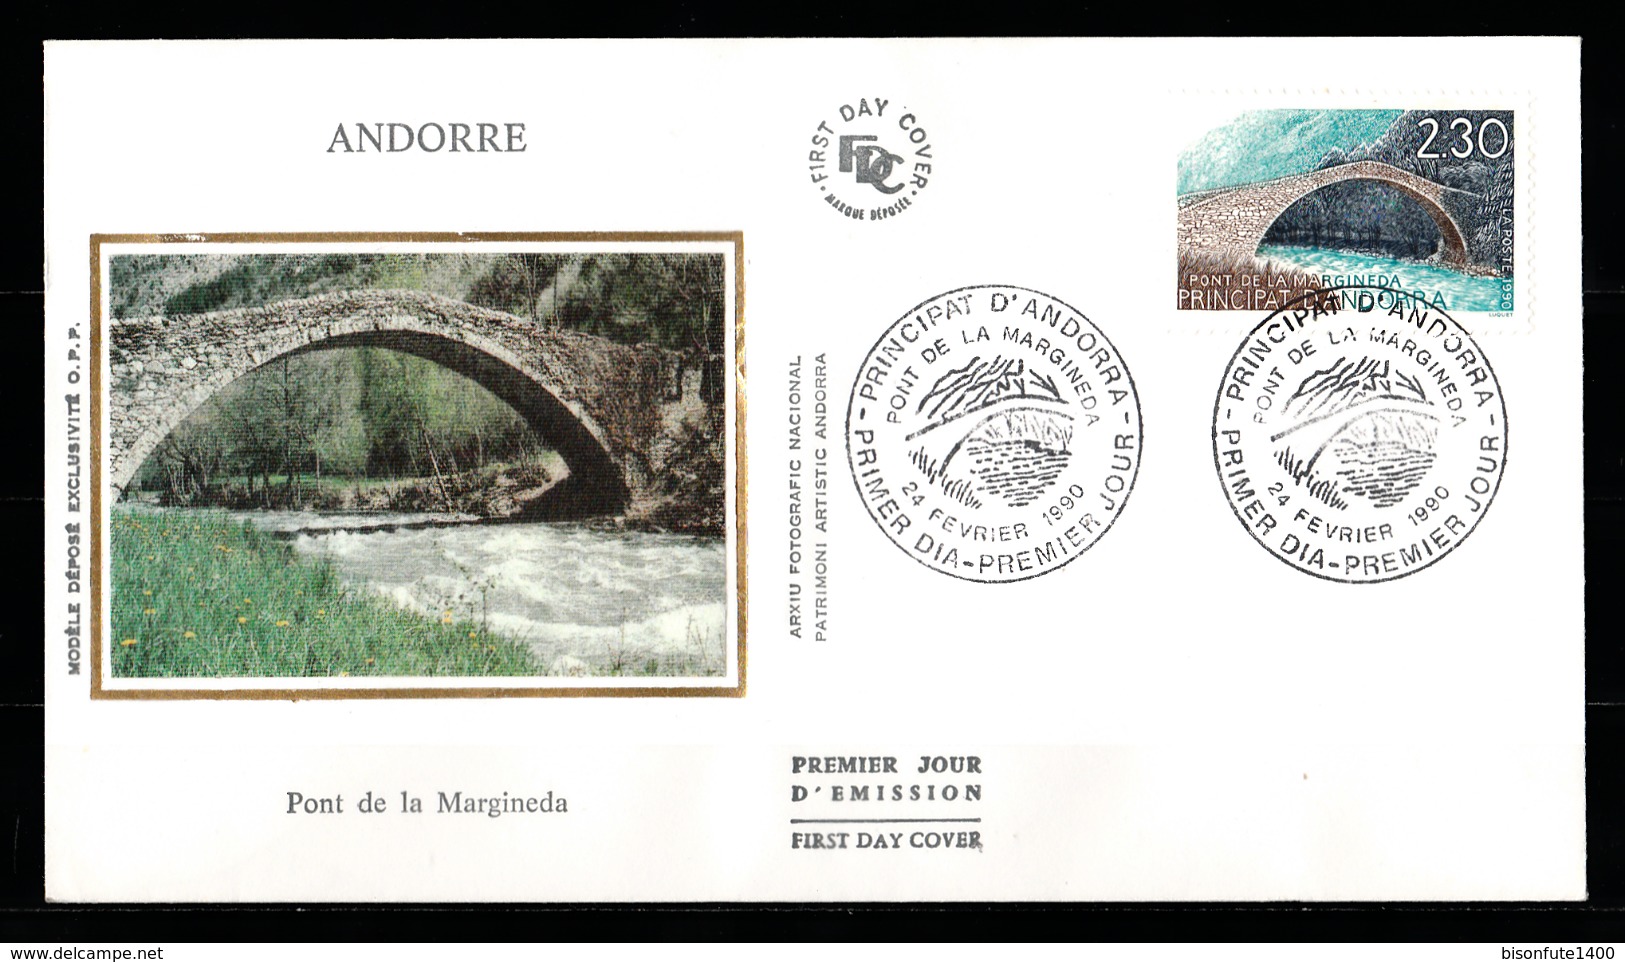 Andorre Français 1990 : Timbres Yvert & Tellier N° 385. - Covers & Documents